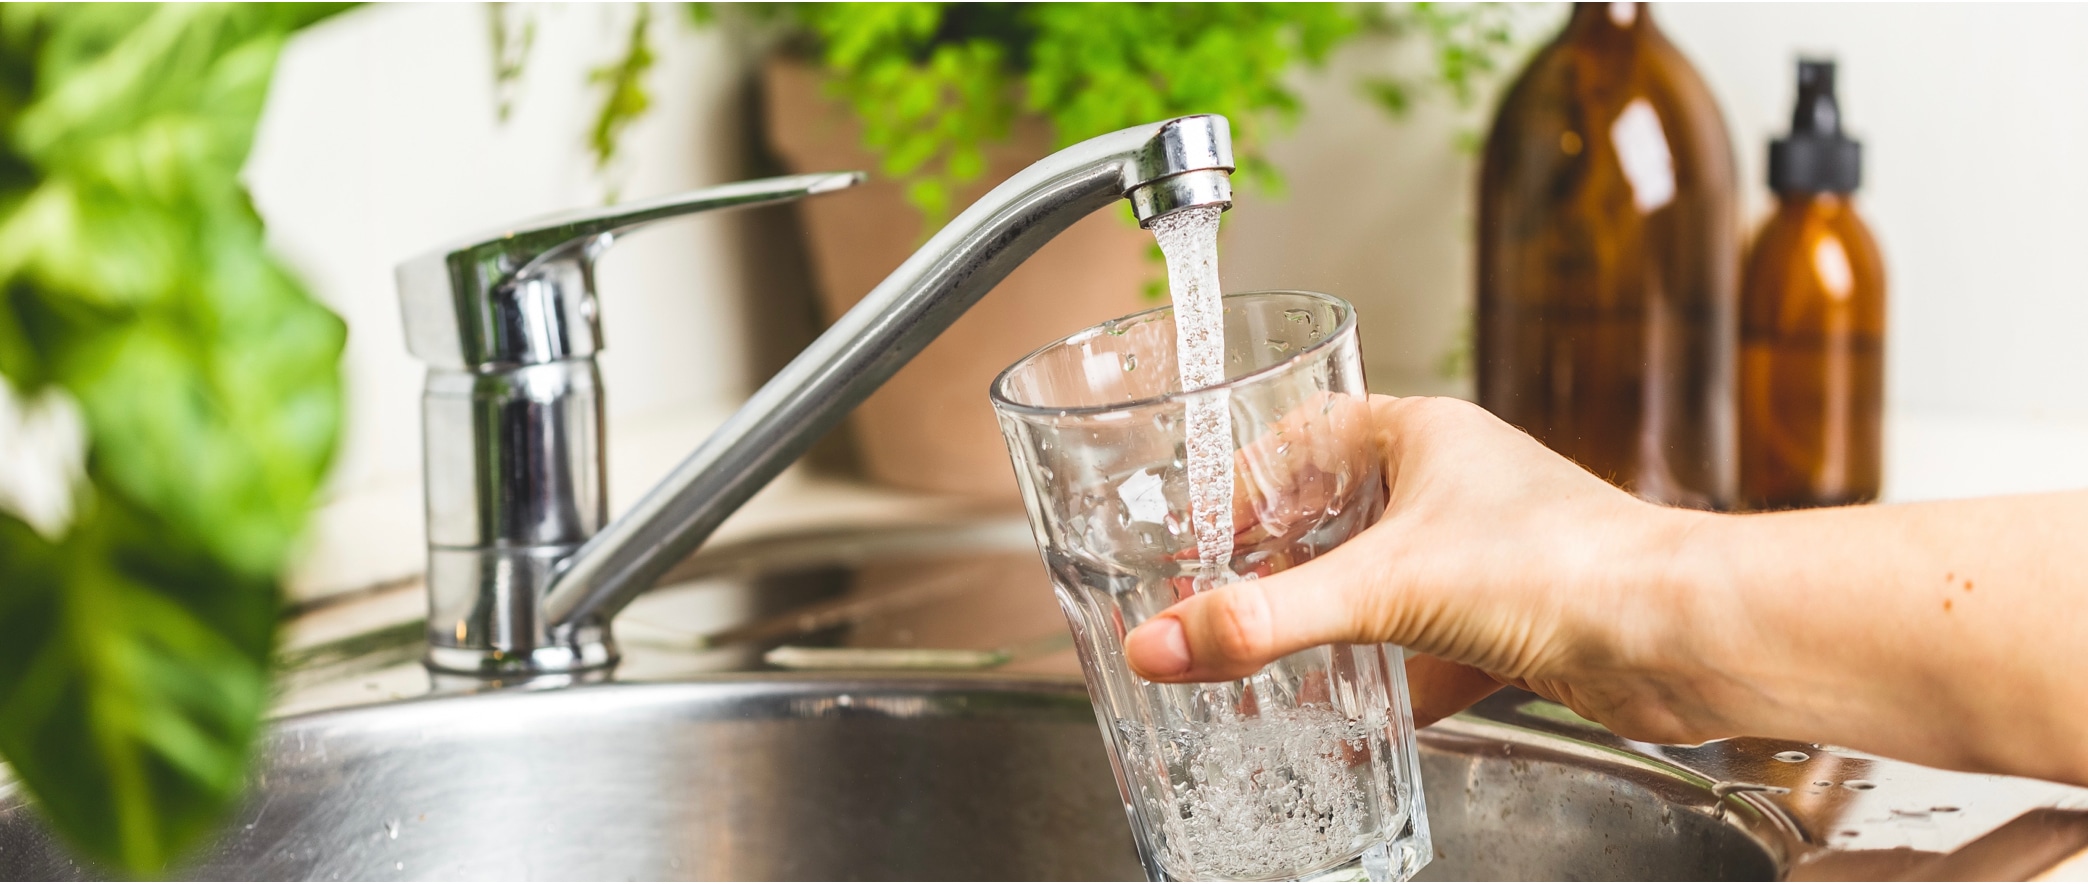 The water that flows from our taps is often distrusted, even though it is highly controlled.